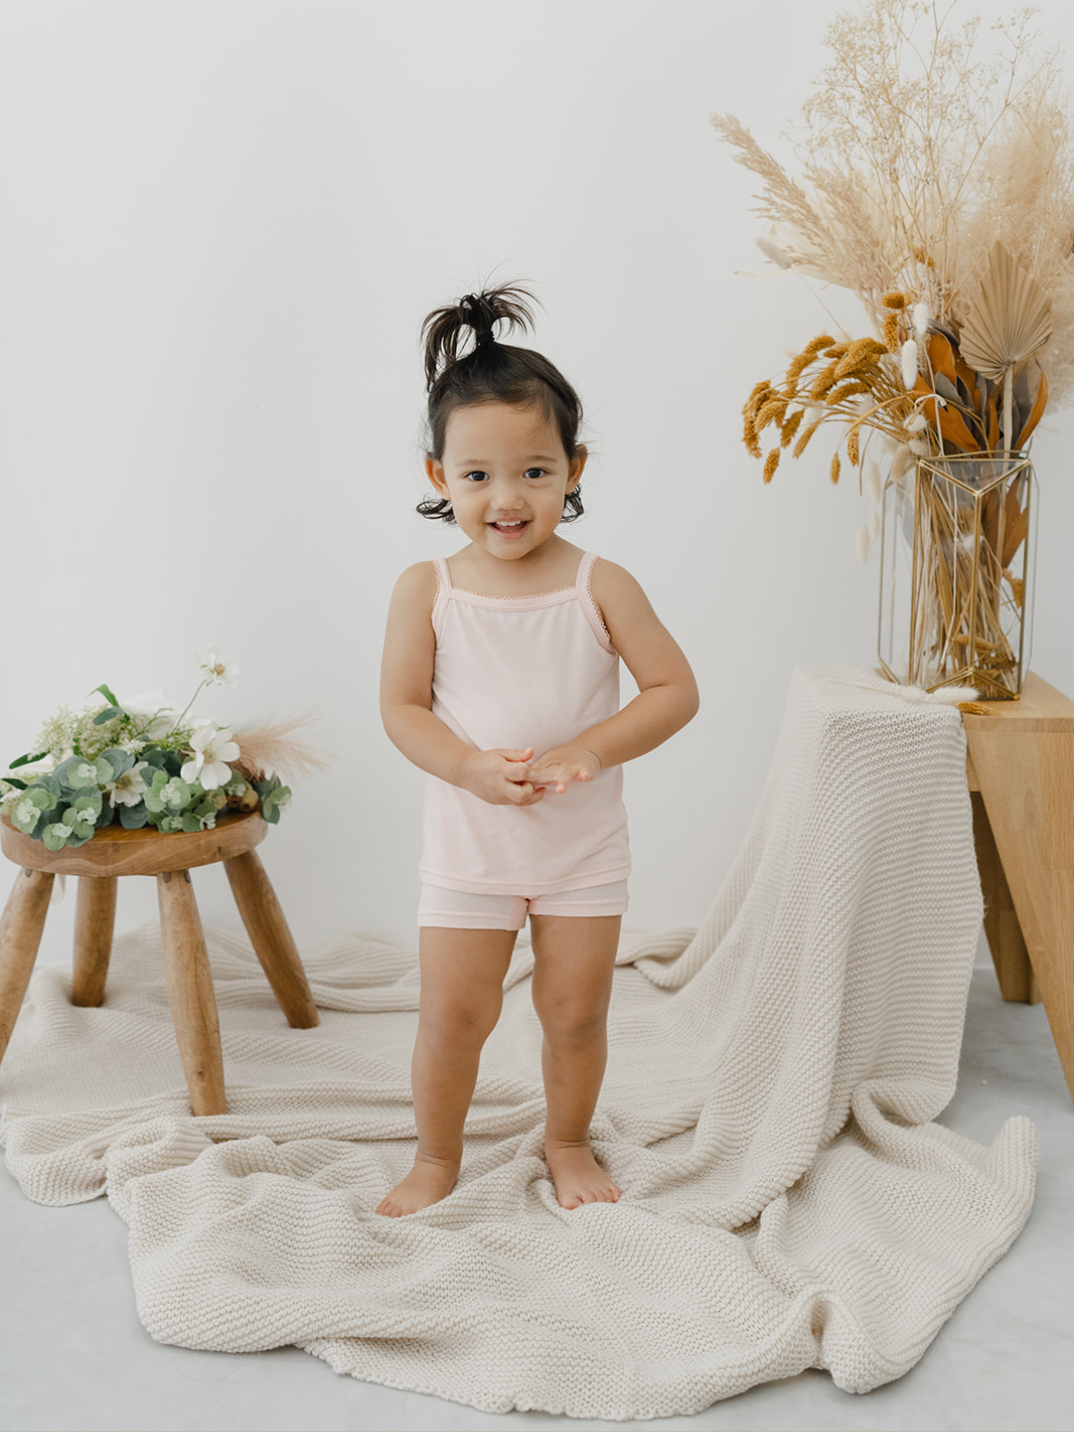 These camisoles are super soft and gentle on your little ones' skin. Designed with a snug fit for play, movement and a comfy night's rest. Add the breathable Camisole layer under your day clothes or snooze in maximum comfort. Made with Lenzing® TENCEL™ Micro Modal Fibers interwoven with Eco Soft Technology. Shop now.